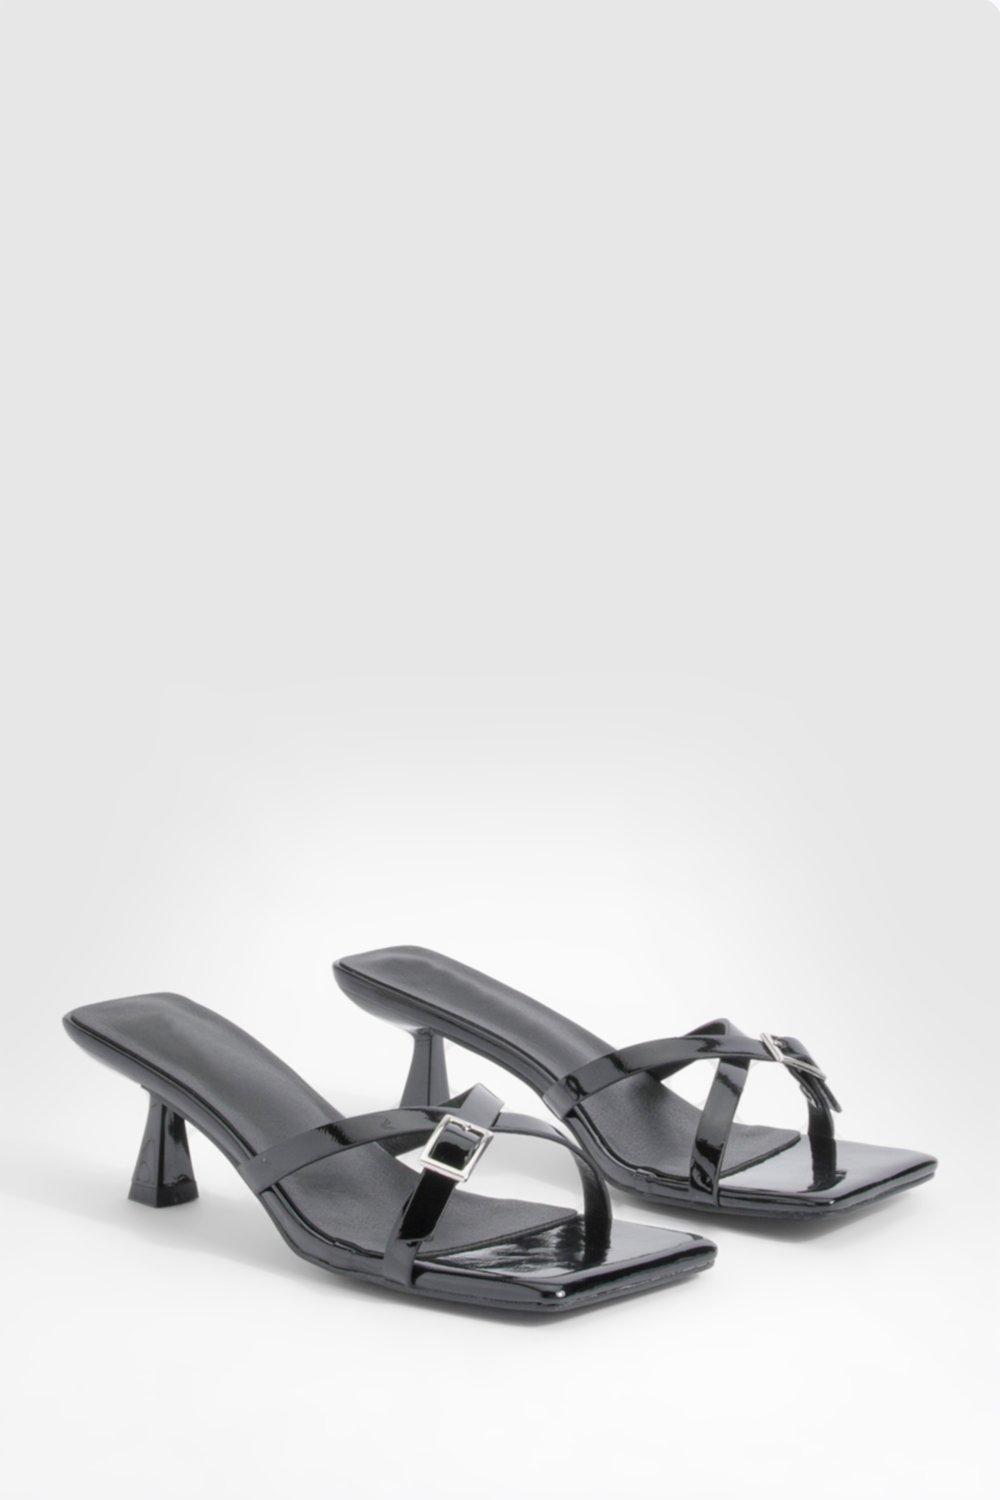 Patent Square Toe Buckle Detail Low Heeled Mules - Black - 10